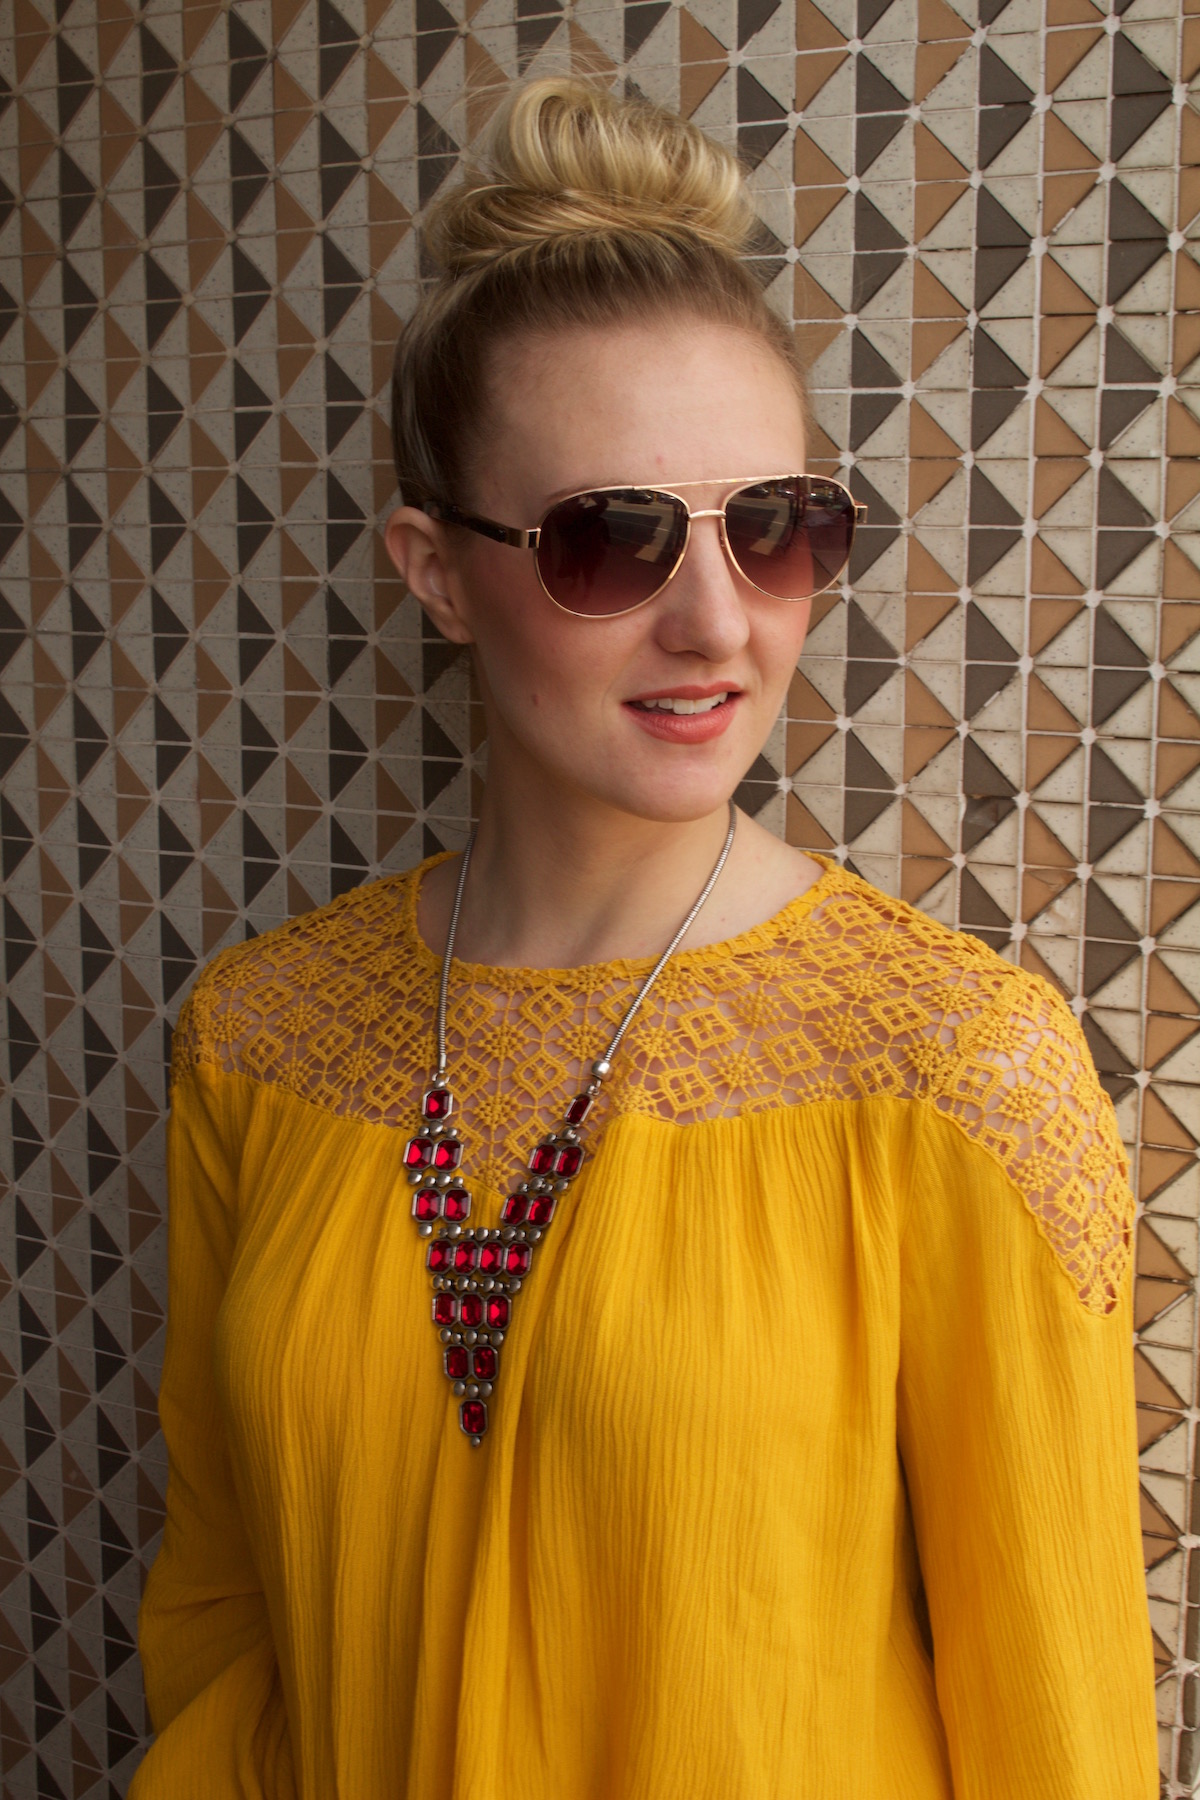 Passion Jewelry Red Pyramid Necklace | styled by Allyn Lewis